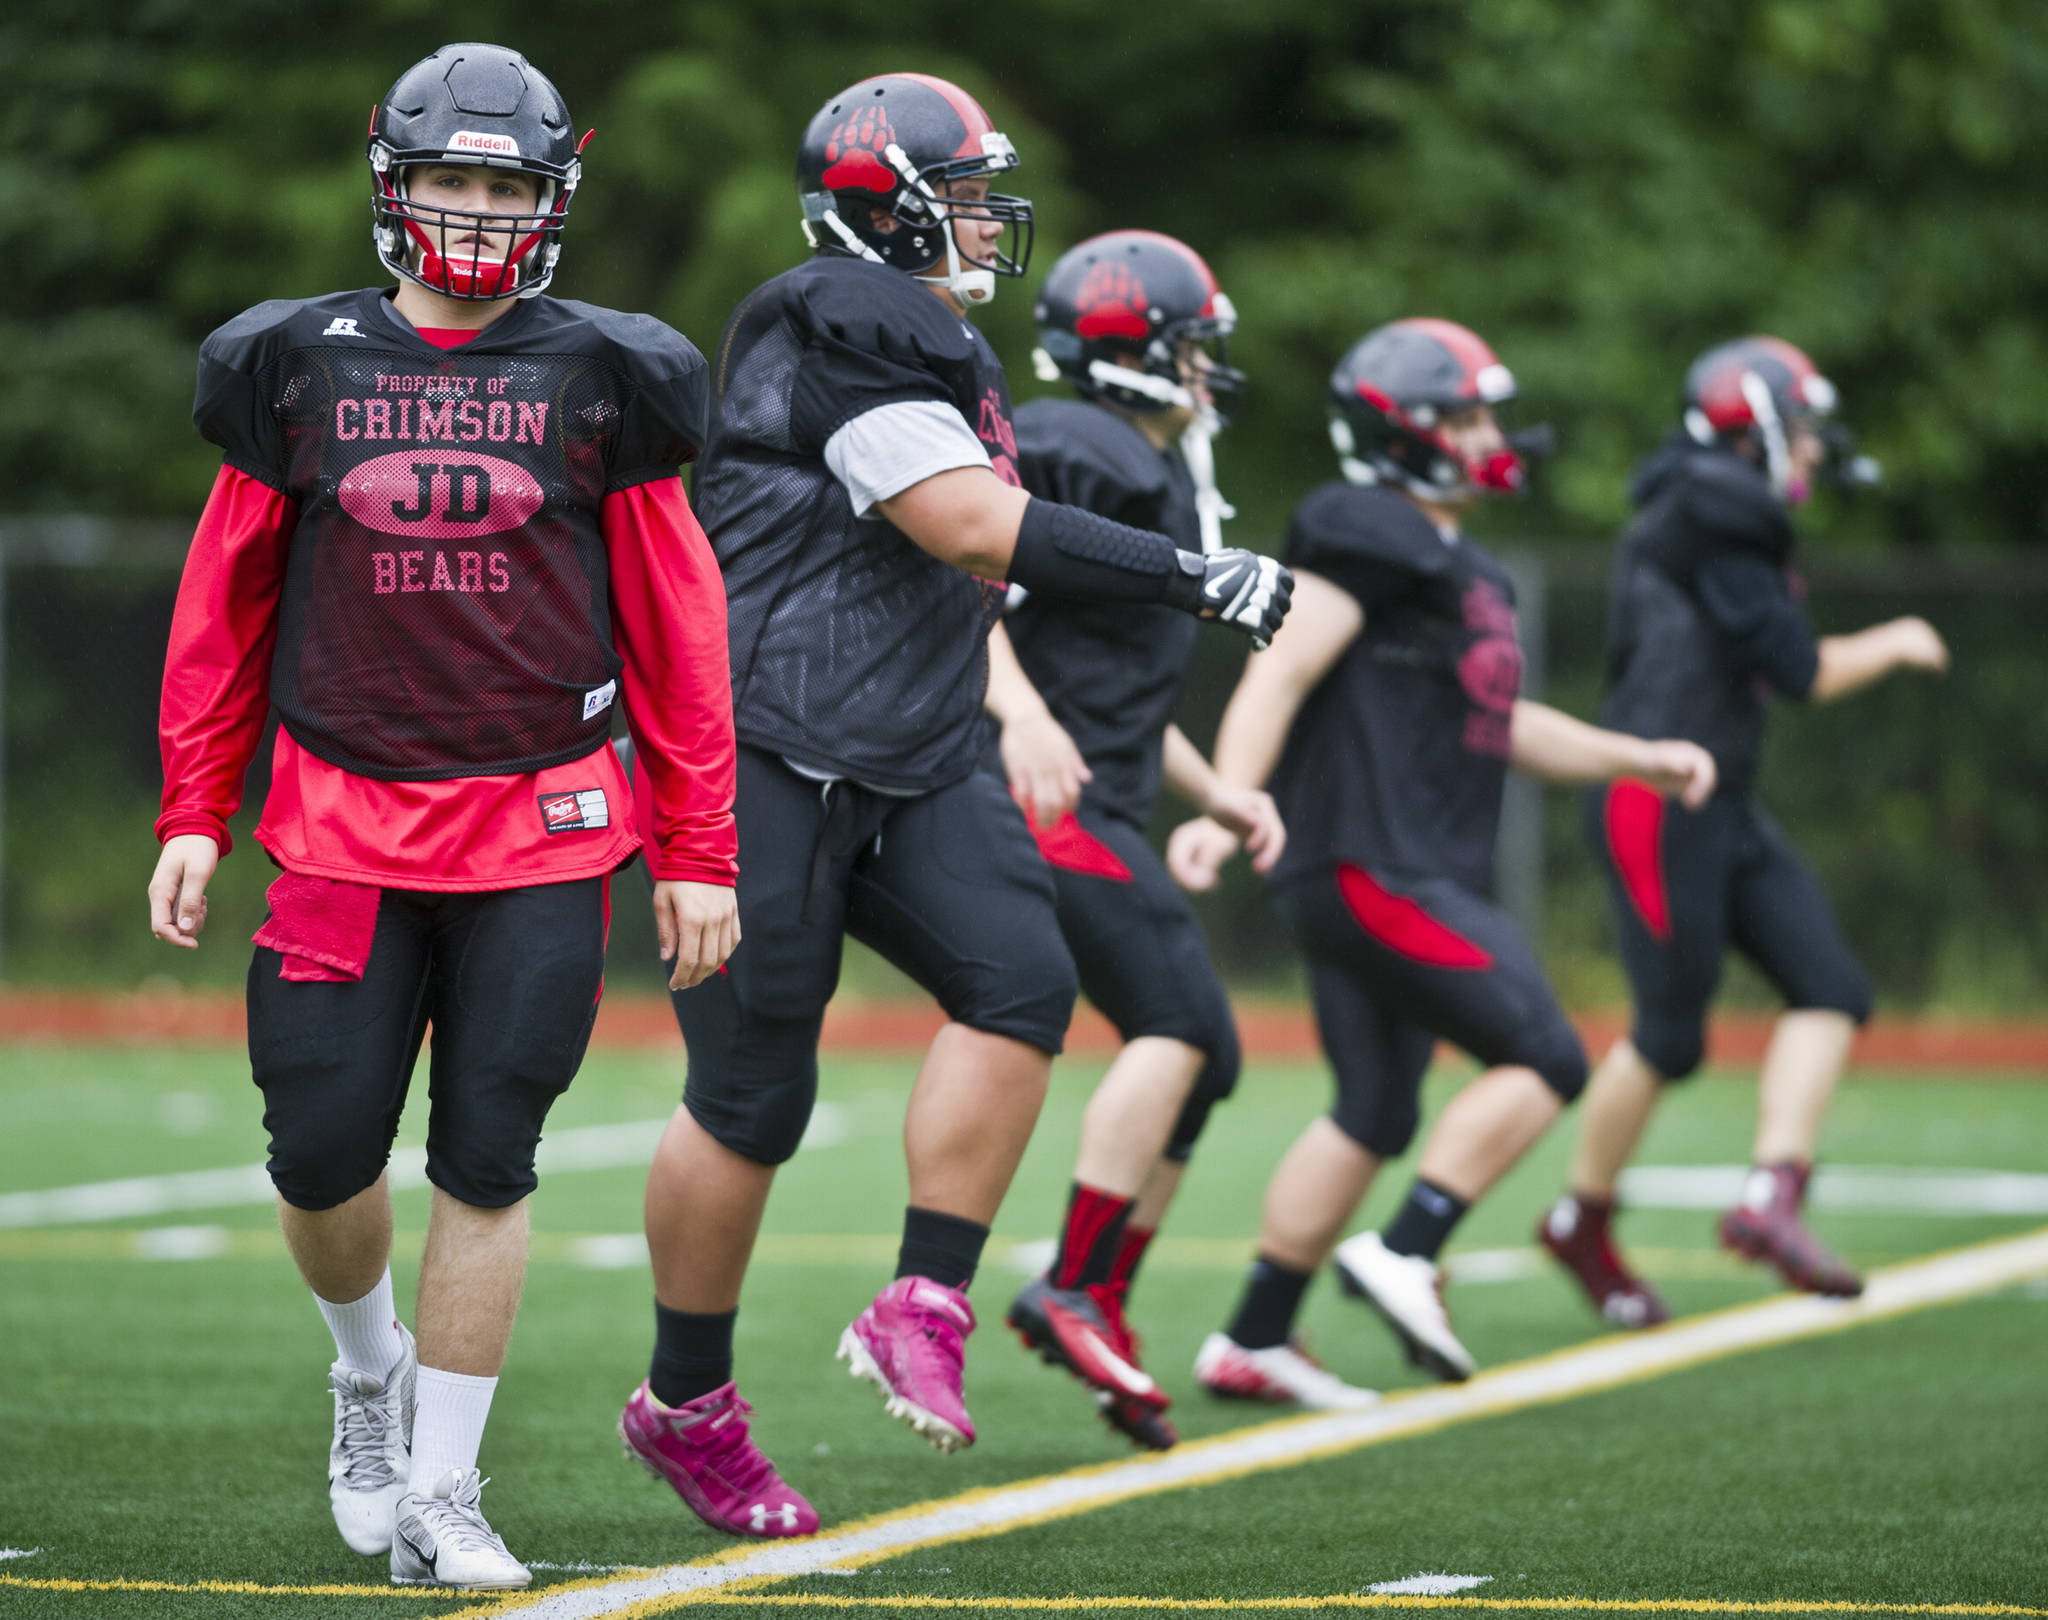 Hunter Hickok leads warmup drills during Juneau-Douglas High School varsity football practice in August of 2015. Hickok was twice named Southeast Conference Defensive Player Of The Year during his time with the Crimson Bears from 2012-2015. (Michael Penn | Juneau Empire File)